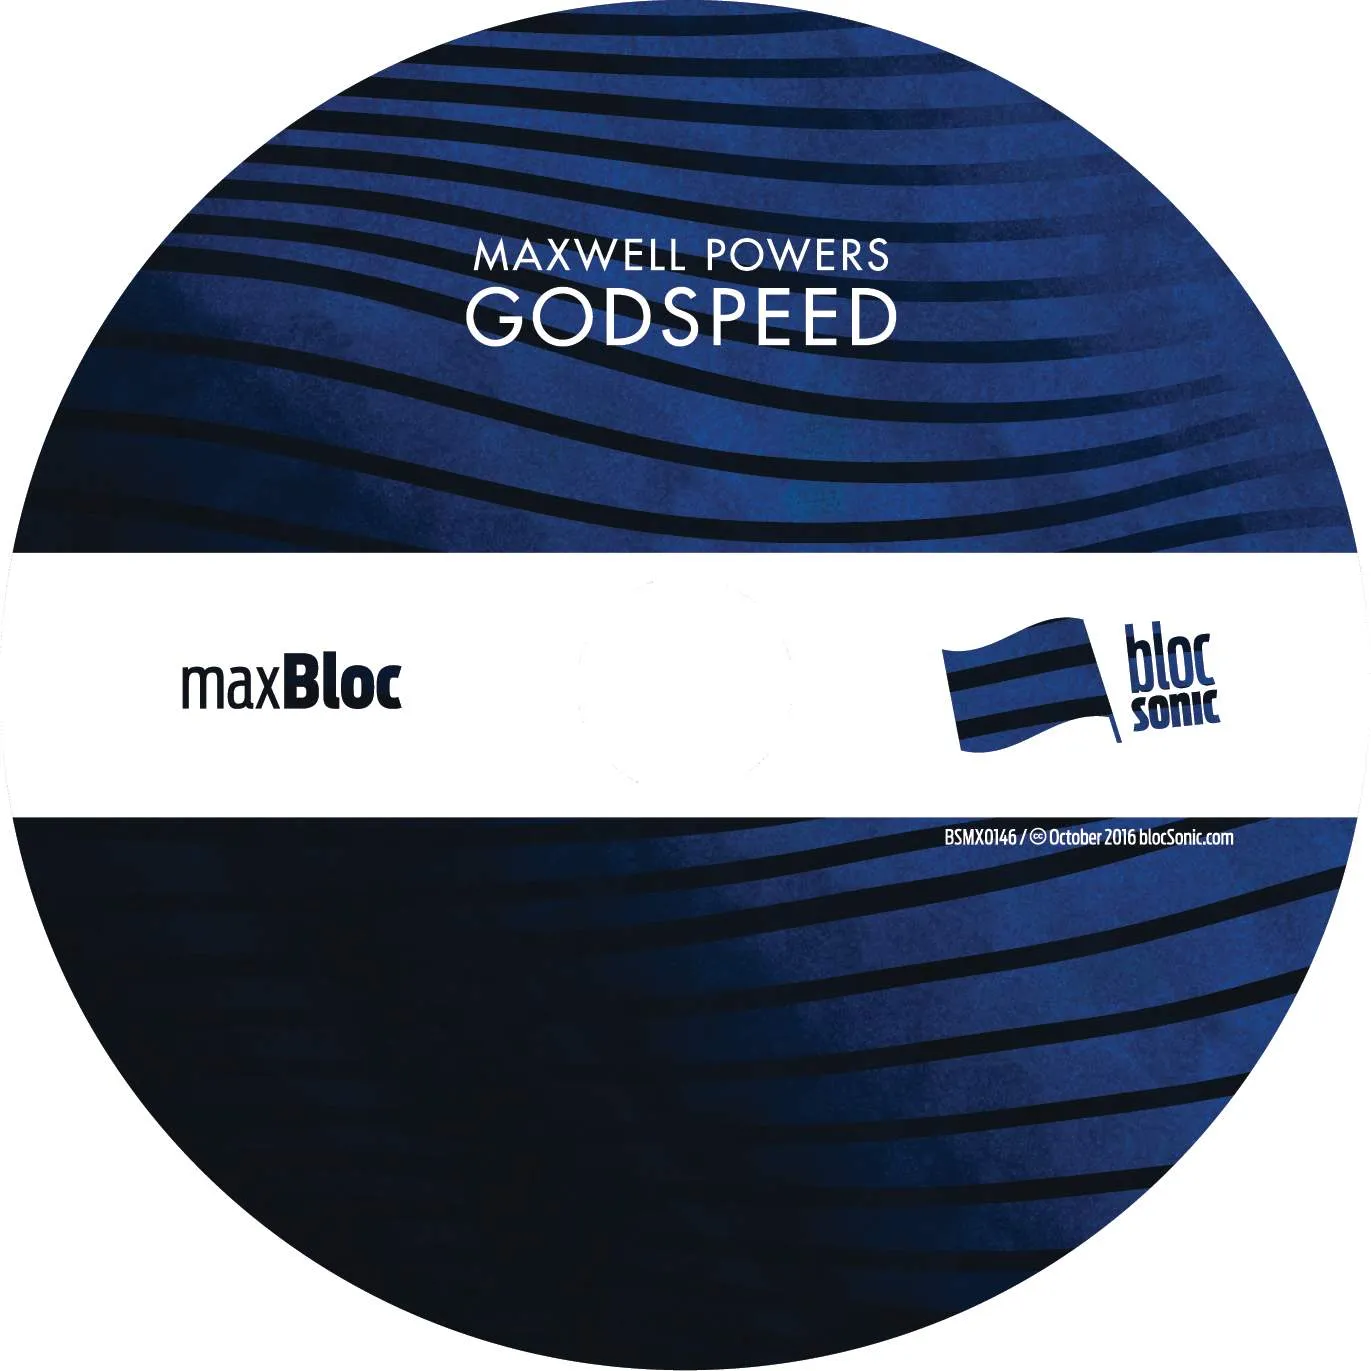 Album disc for “Godspeed” by Maxwell Powers